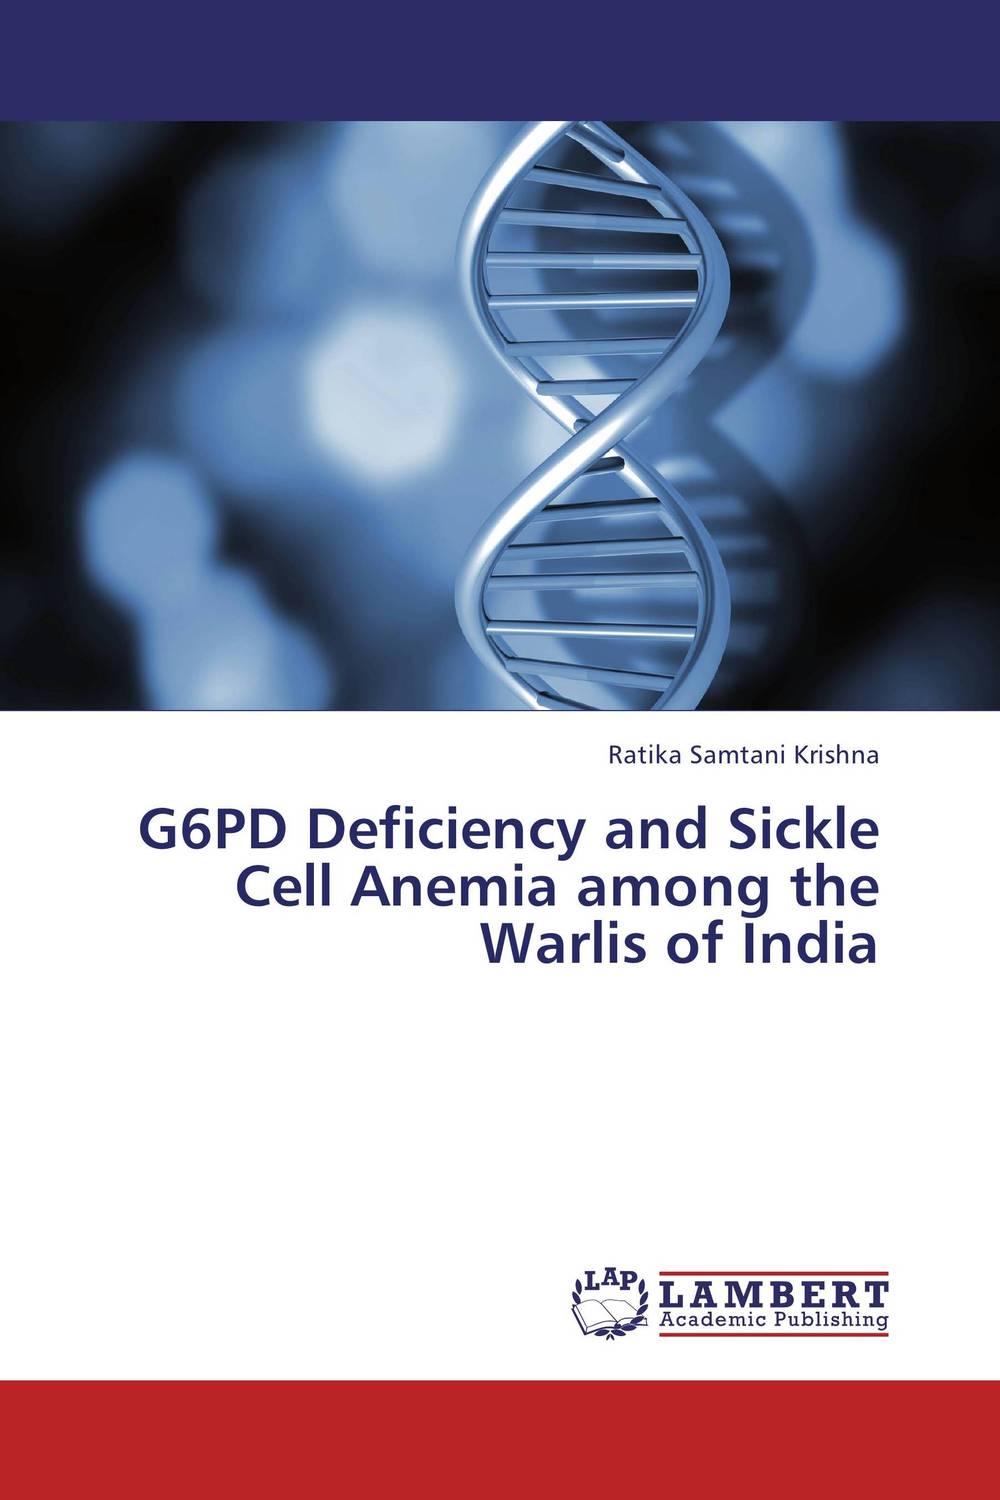 G6PD Deficiency and Sickle Cell Anemia among the Warlis of India